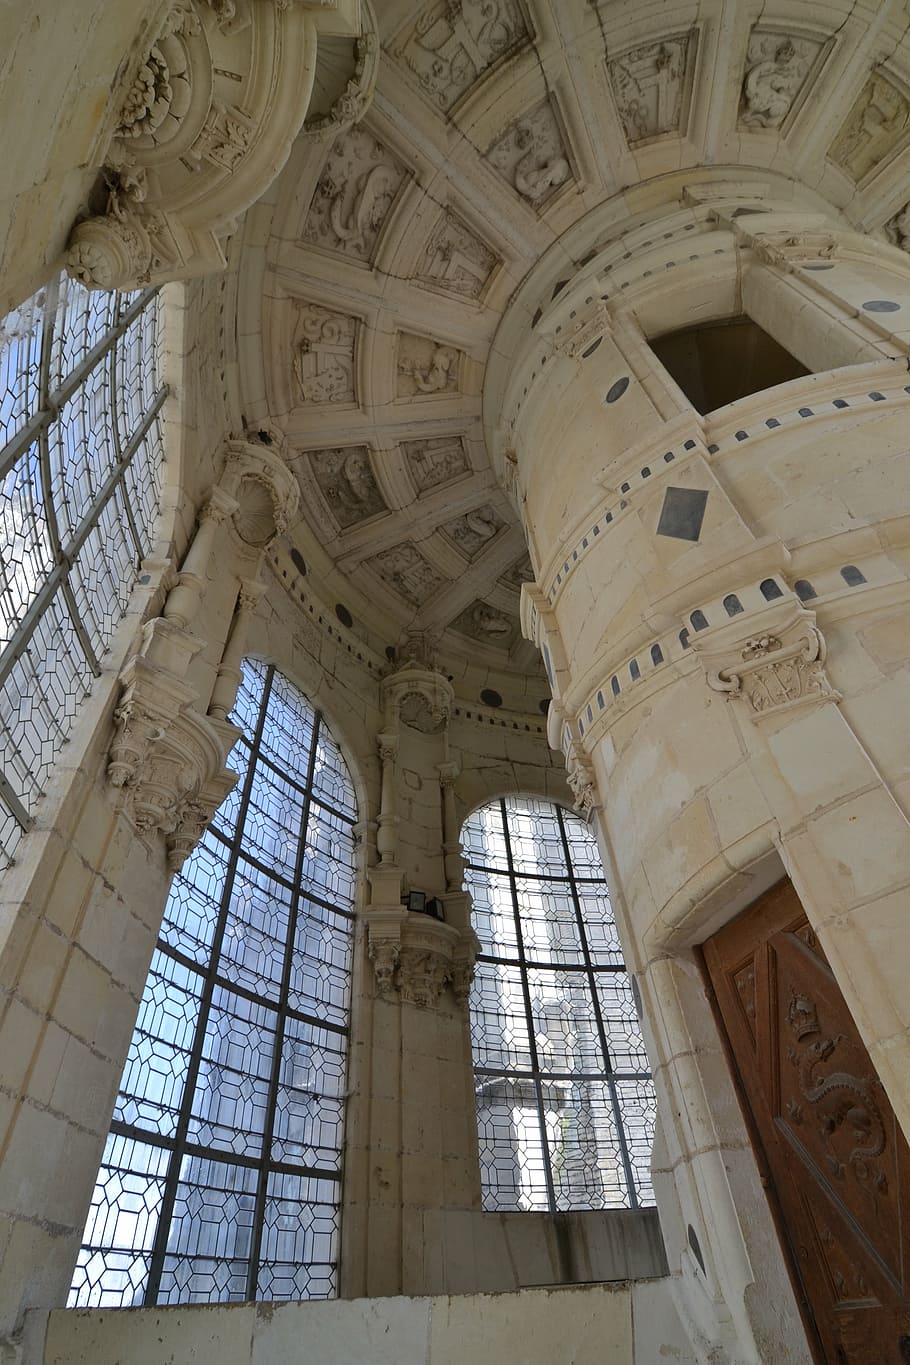 the castle lantern, lantern, spiral staircase, royal staircase, château de chambord, france, low angle view, architecture, built structure, ceiling